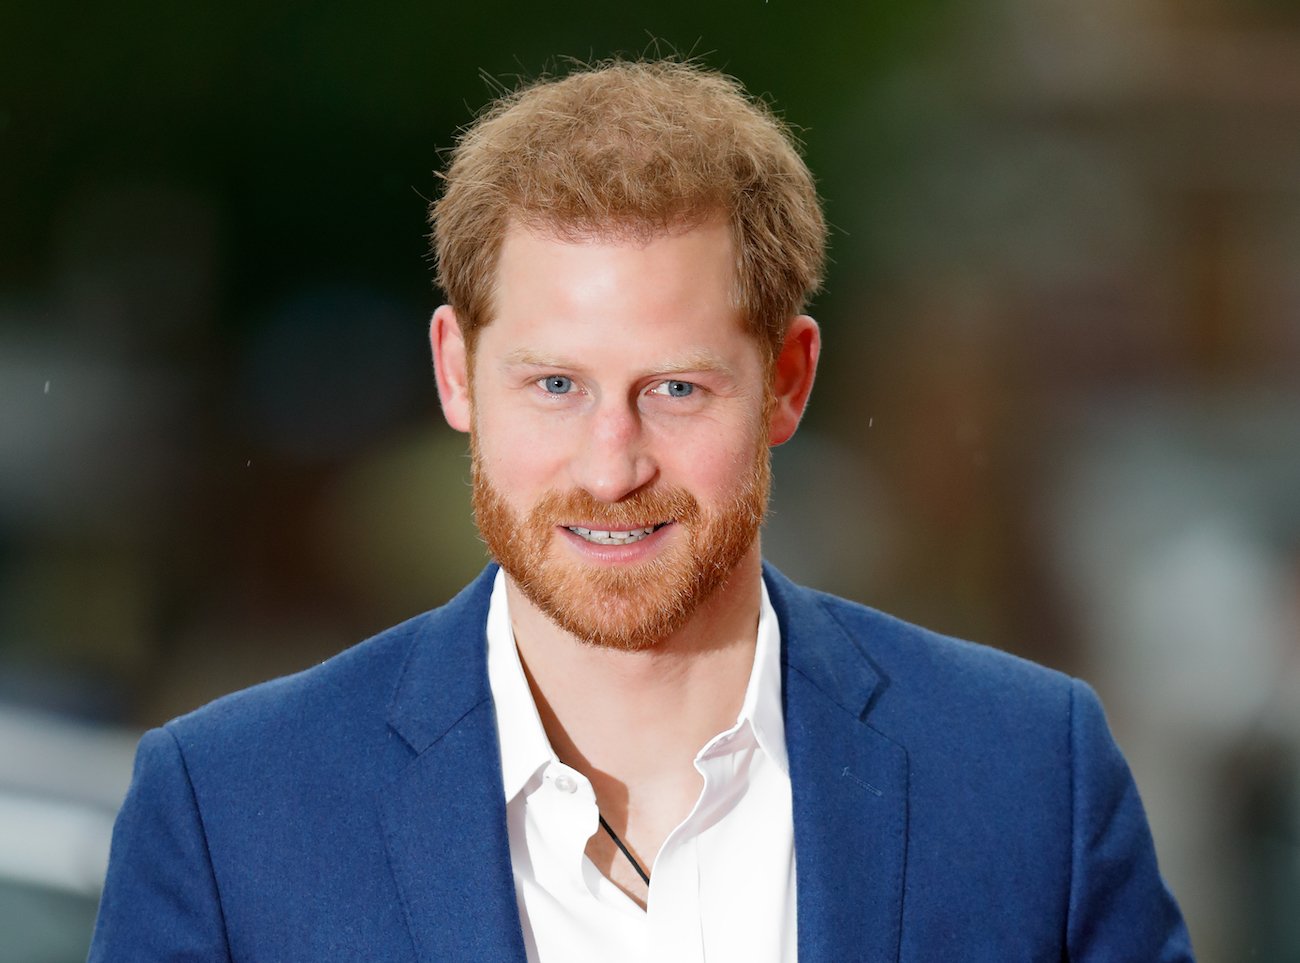 Prince Harry wearing a blue jacket and looking on